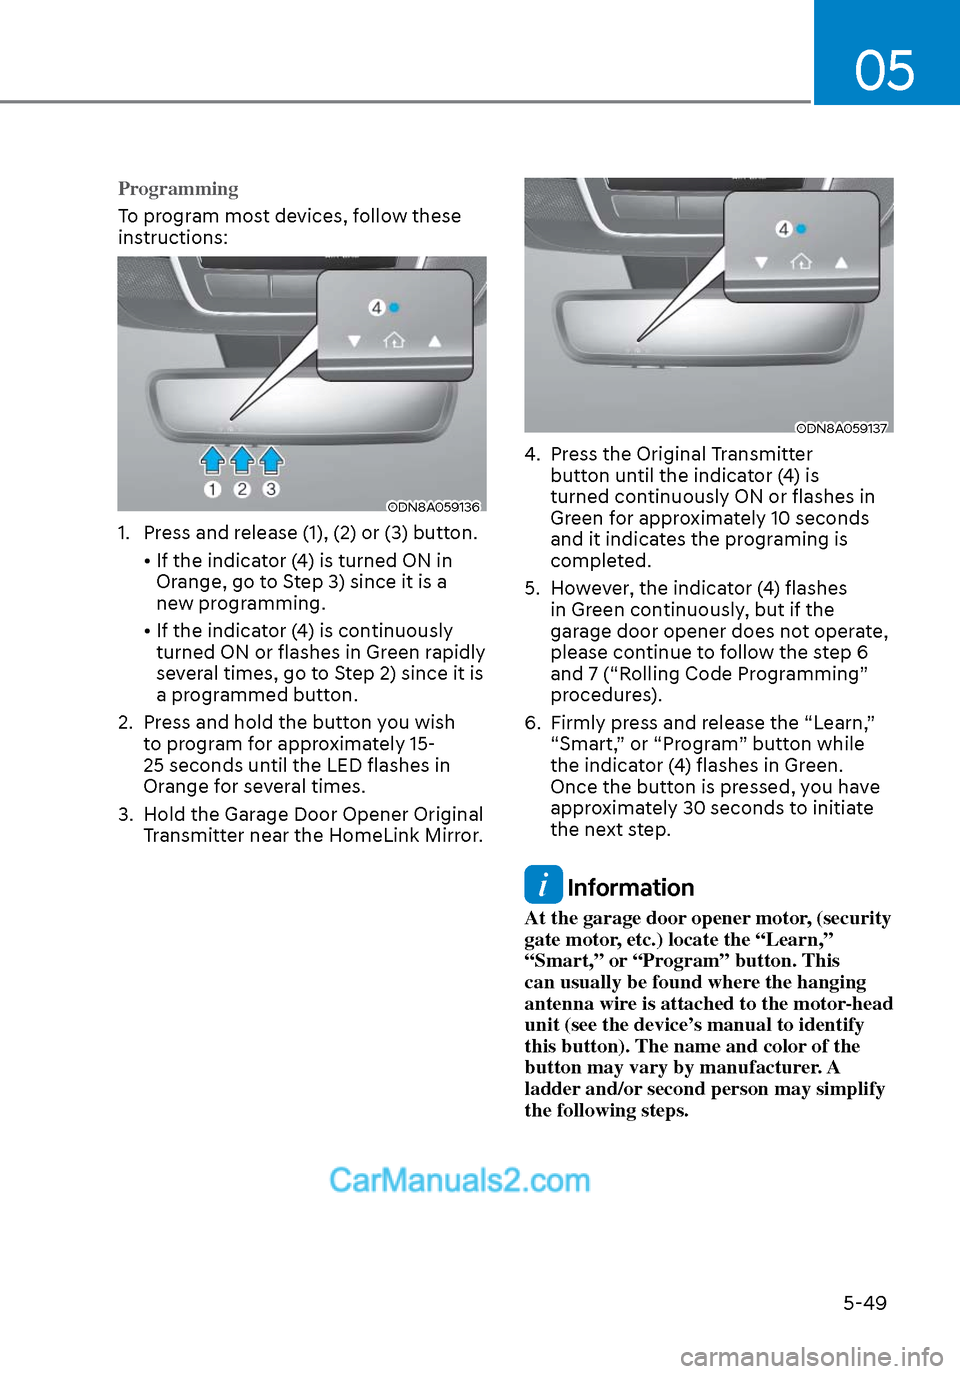 Hyundai Sonata 2020  Owners Manual 05
5-49
Programming
To program most devices, follow these 
ins
tructions:
ODN8A059136ODN8A059136
1.  Press and release (1), (2) or (3) button. 
  •  If the indicator (4) is turned ON in  Orange, go 